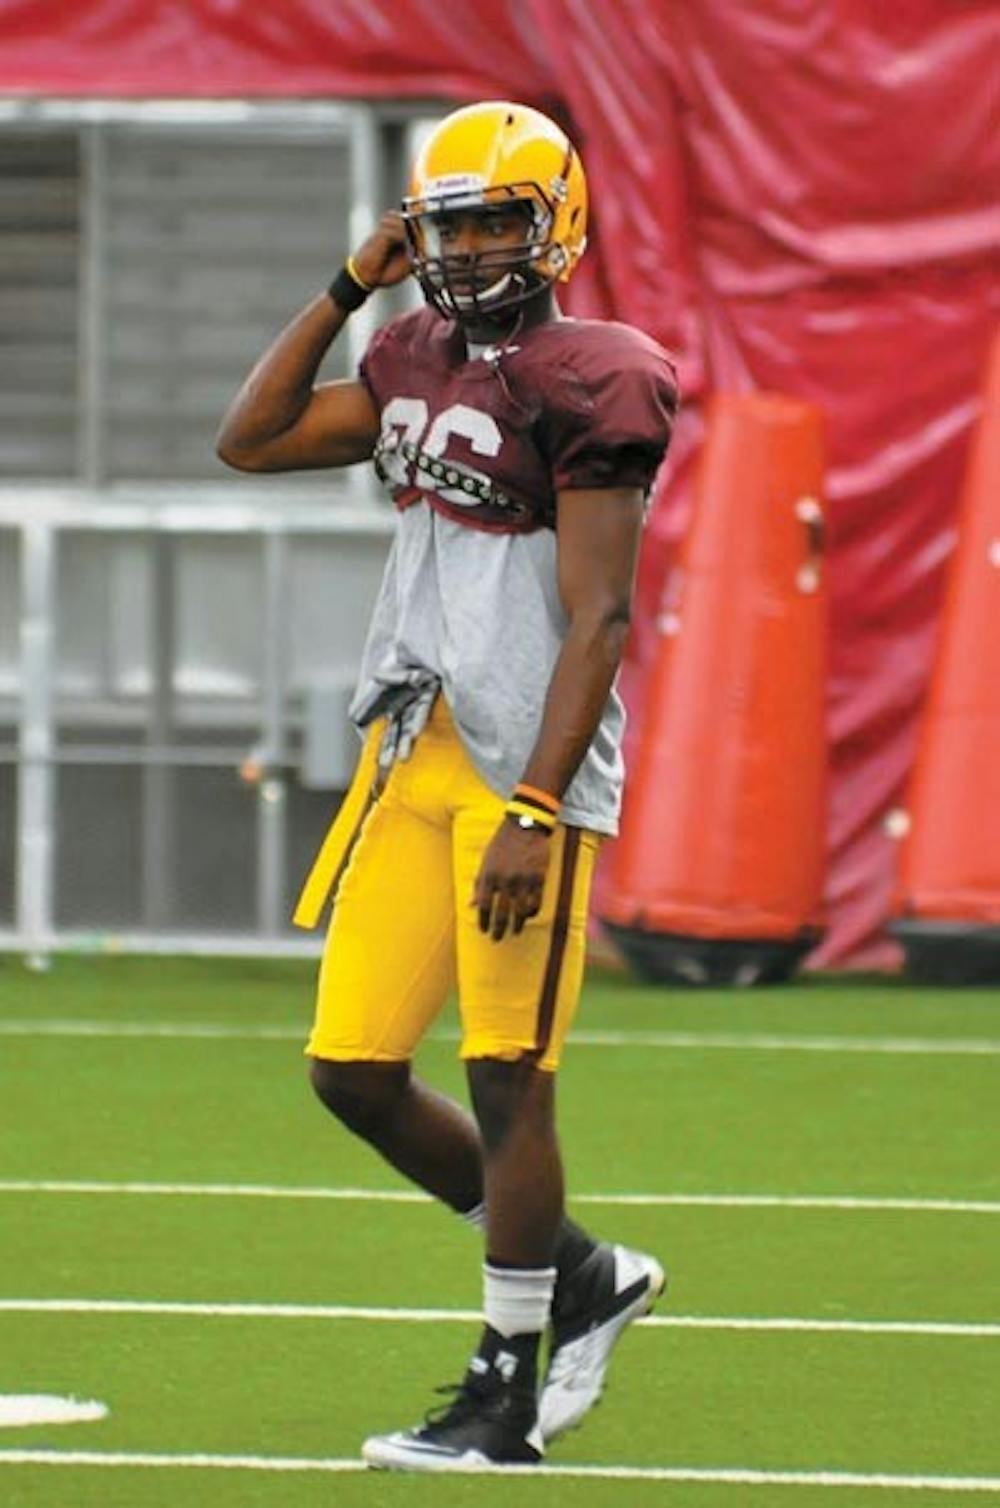 HOMETOWN STAR: Redshirt junior wide receiver T.J. Simpson works out in practice Tuesday. (Photo by Aaron Lavinsky)